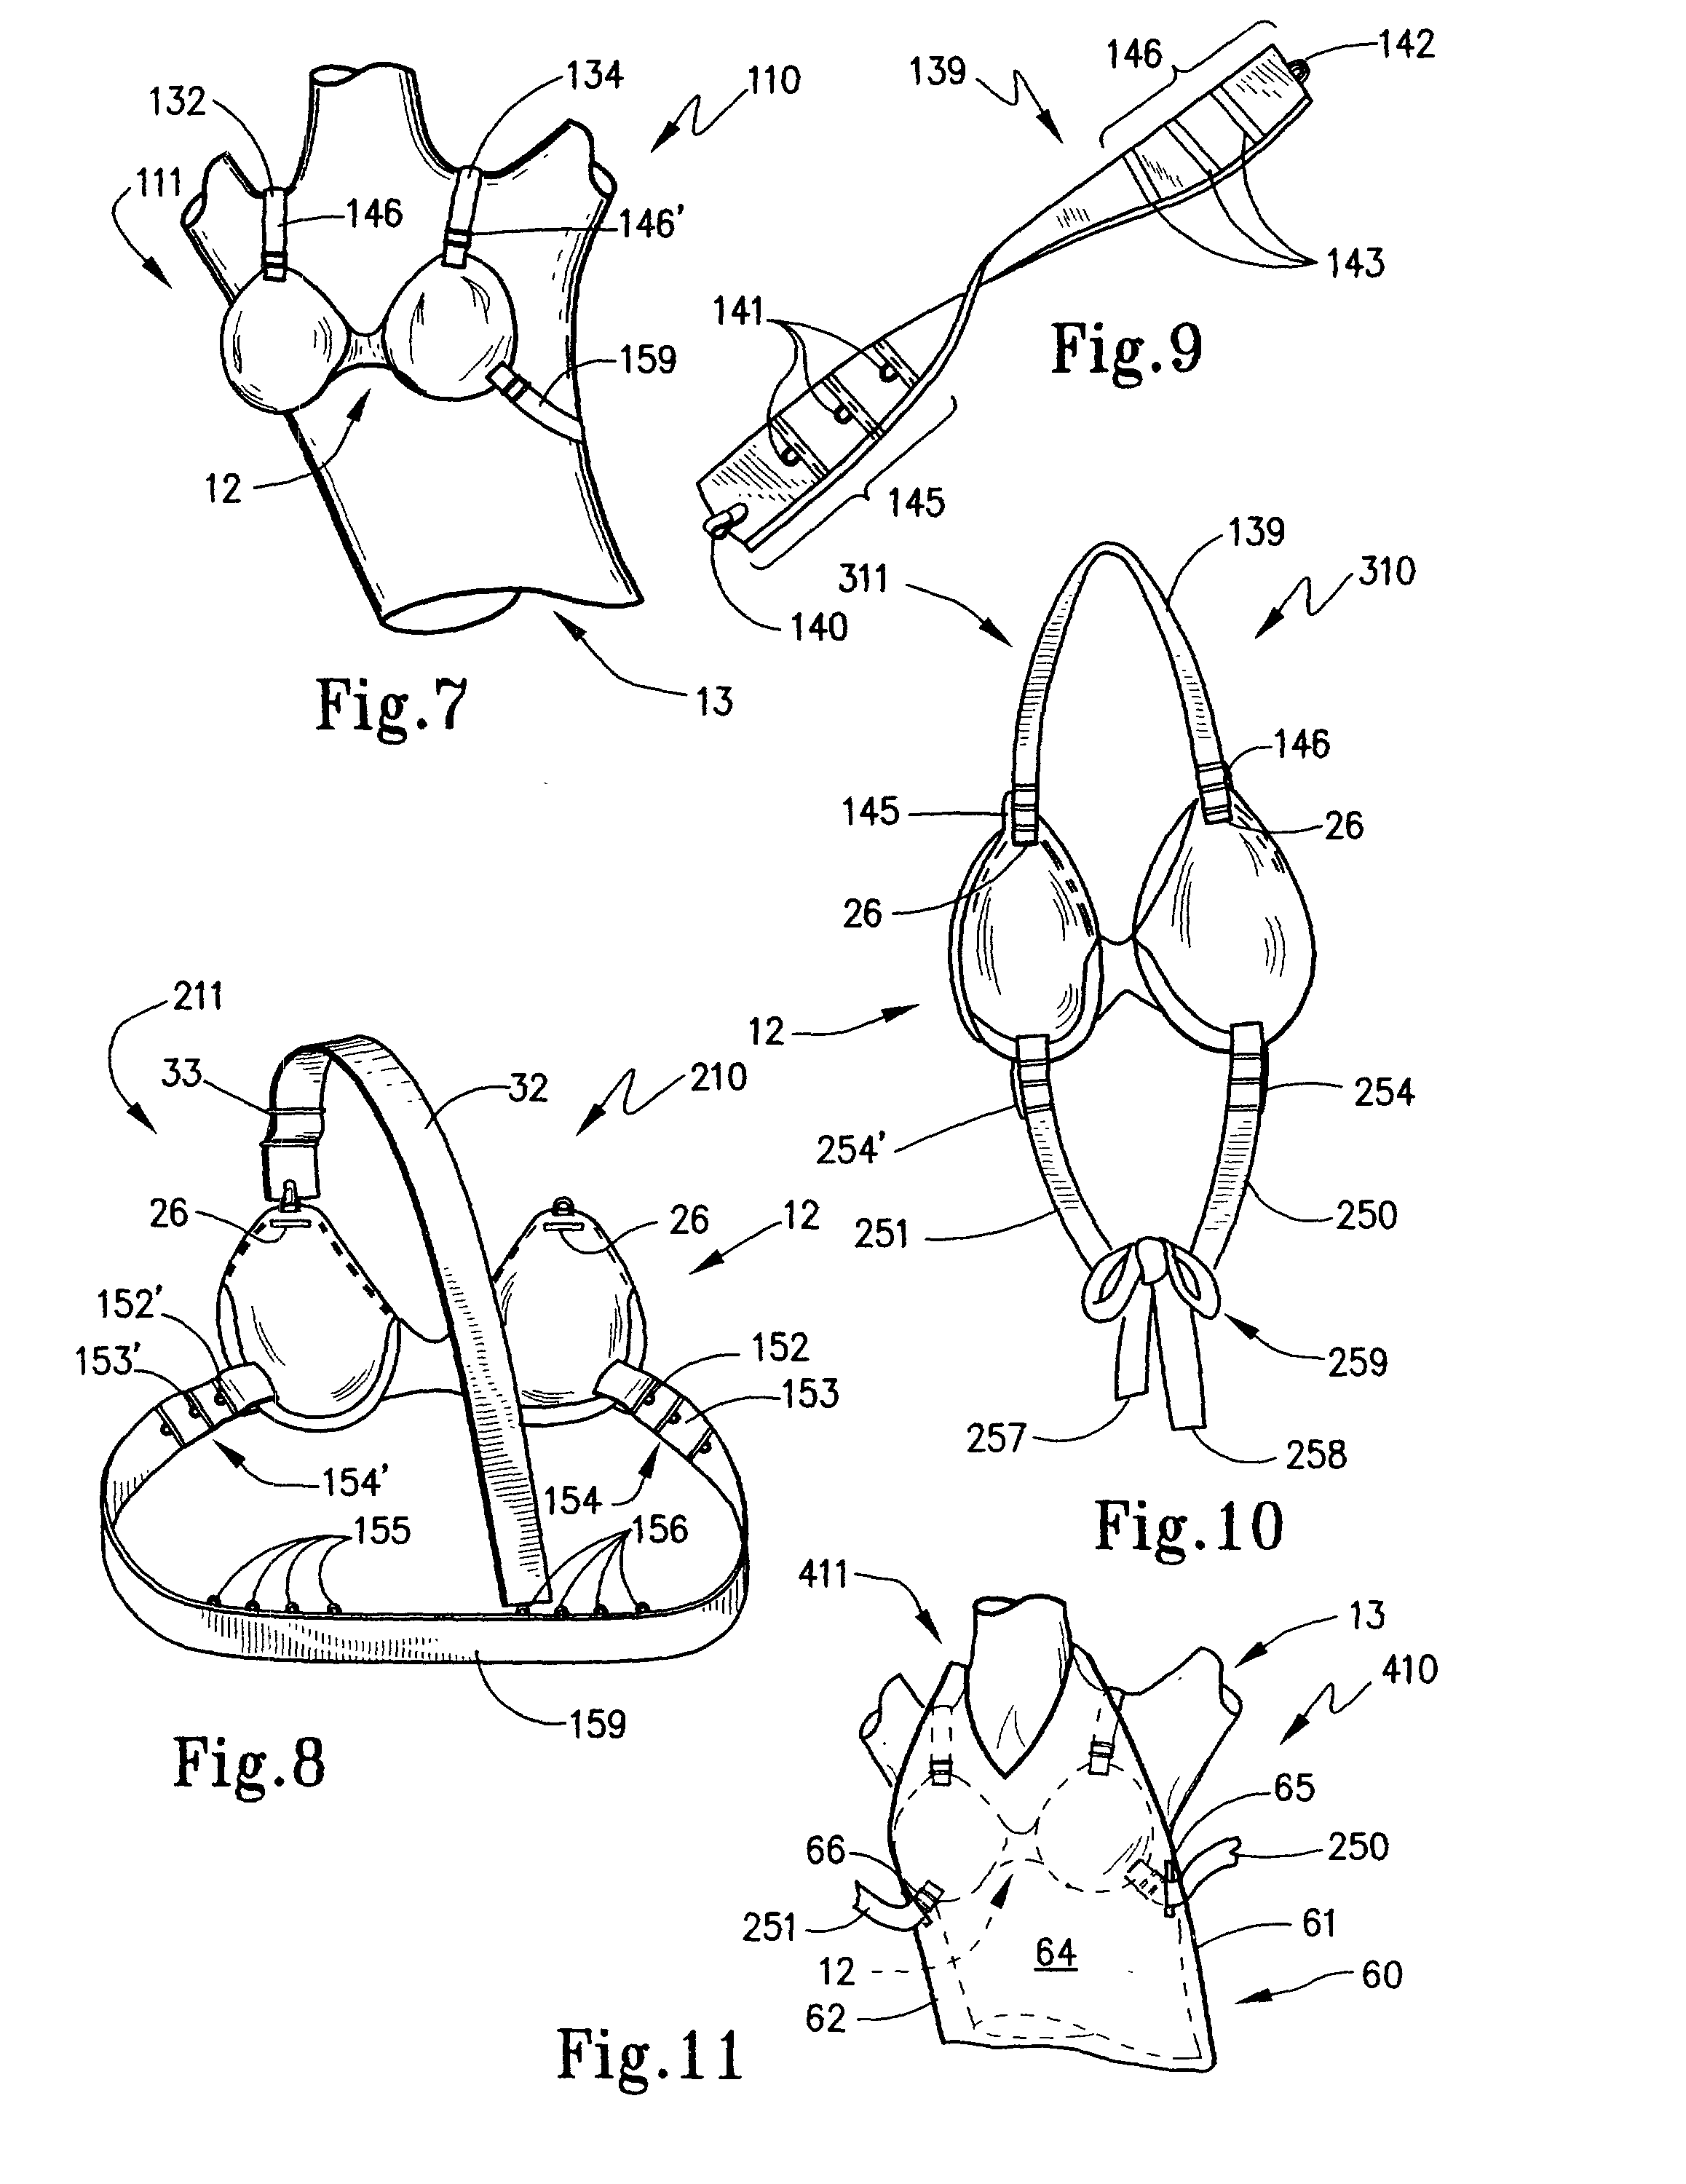 Breast support garment system and method therefor